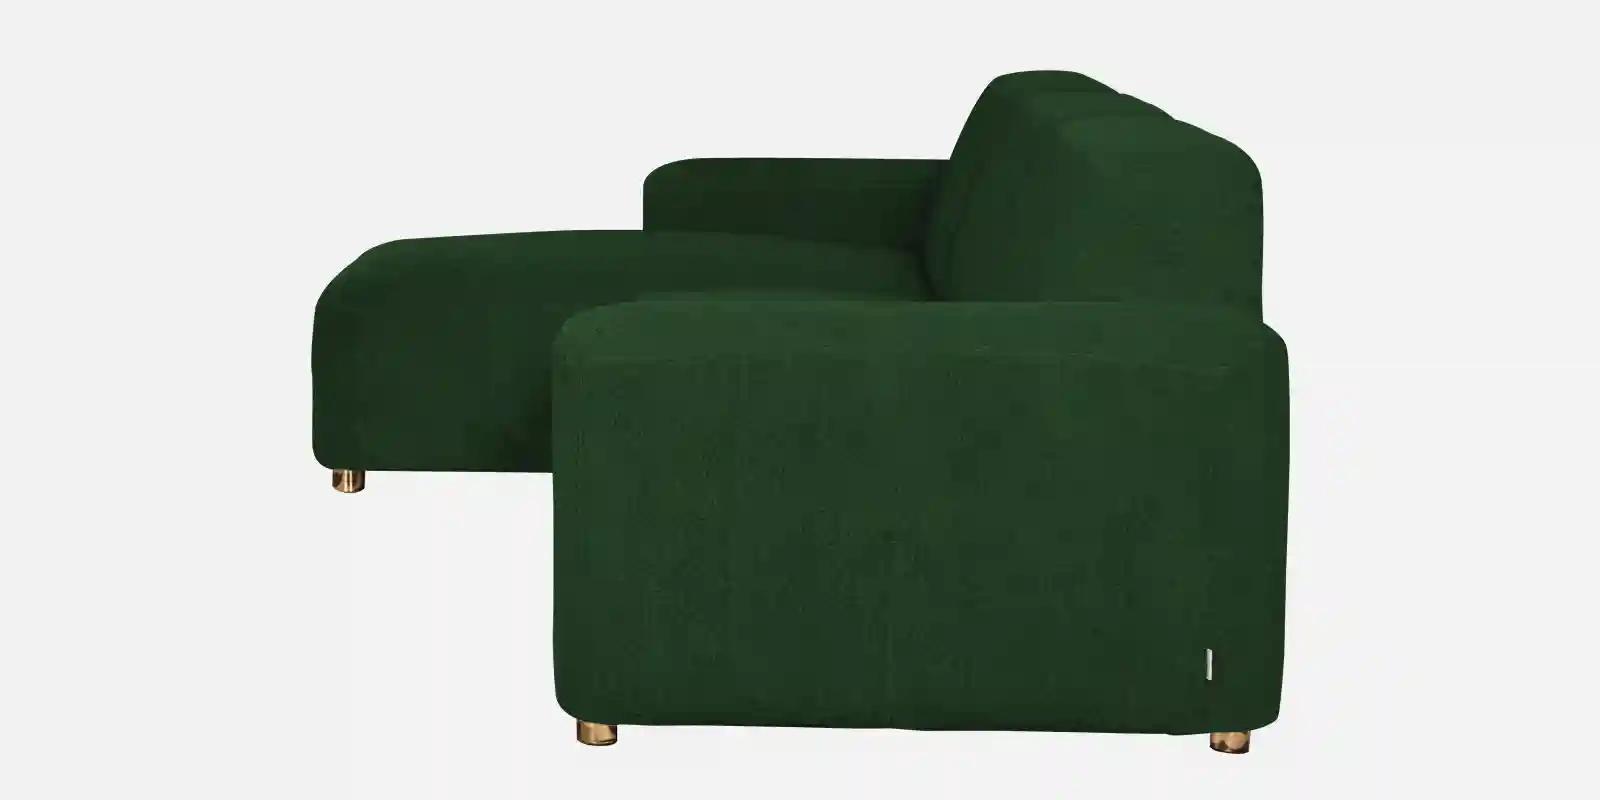 Pine Wood Polyester Fabric Green 2 - Seater Sofa RHS